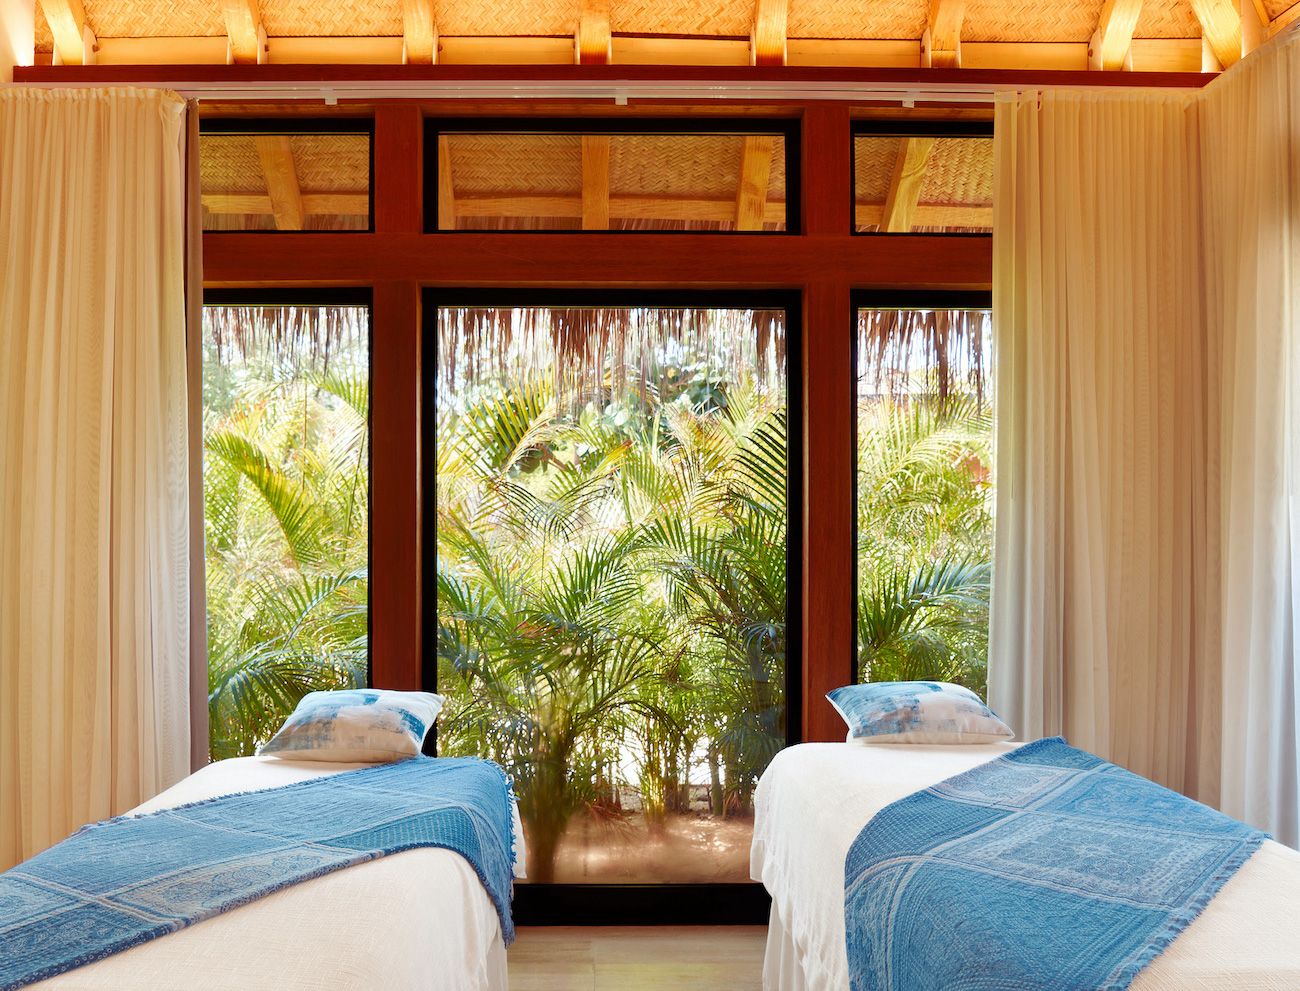 Zadún, a Ritz-Carlton Reserve<br /><em>San José del Cabo, Mexico</em>“/>
<div>
<h3>Zadún, a Ritz-Carlton Reserve<br /><em>San José del Cabo, Mexico</em></h3>
<p>“I’ve been dreaming of the therapeutic massage I experienced at Spa Alkemia at the Ritz-Carlton Zadún for months. The lodge is 45 minutes from the bustling epicenter of Cabo, but at the time you step into the expansive, modern-day house, you may forget about you are in Cabo at all, conserve for the beach front. Occur listed here when you want to escape. If you do crave a little little bit of activity, the resort is about 15 minutes from Flora Farms and Acre, two of my favored spots in all of Mexico.” —Noora Raj Brown, executive vice president, brand</p>
</div>
</li>
<li><img decoding=